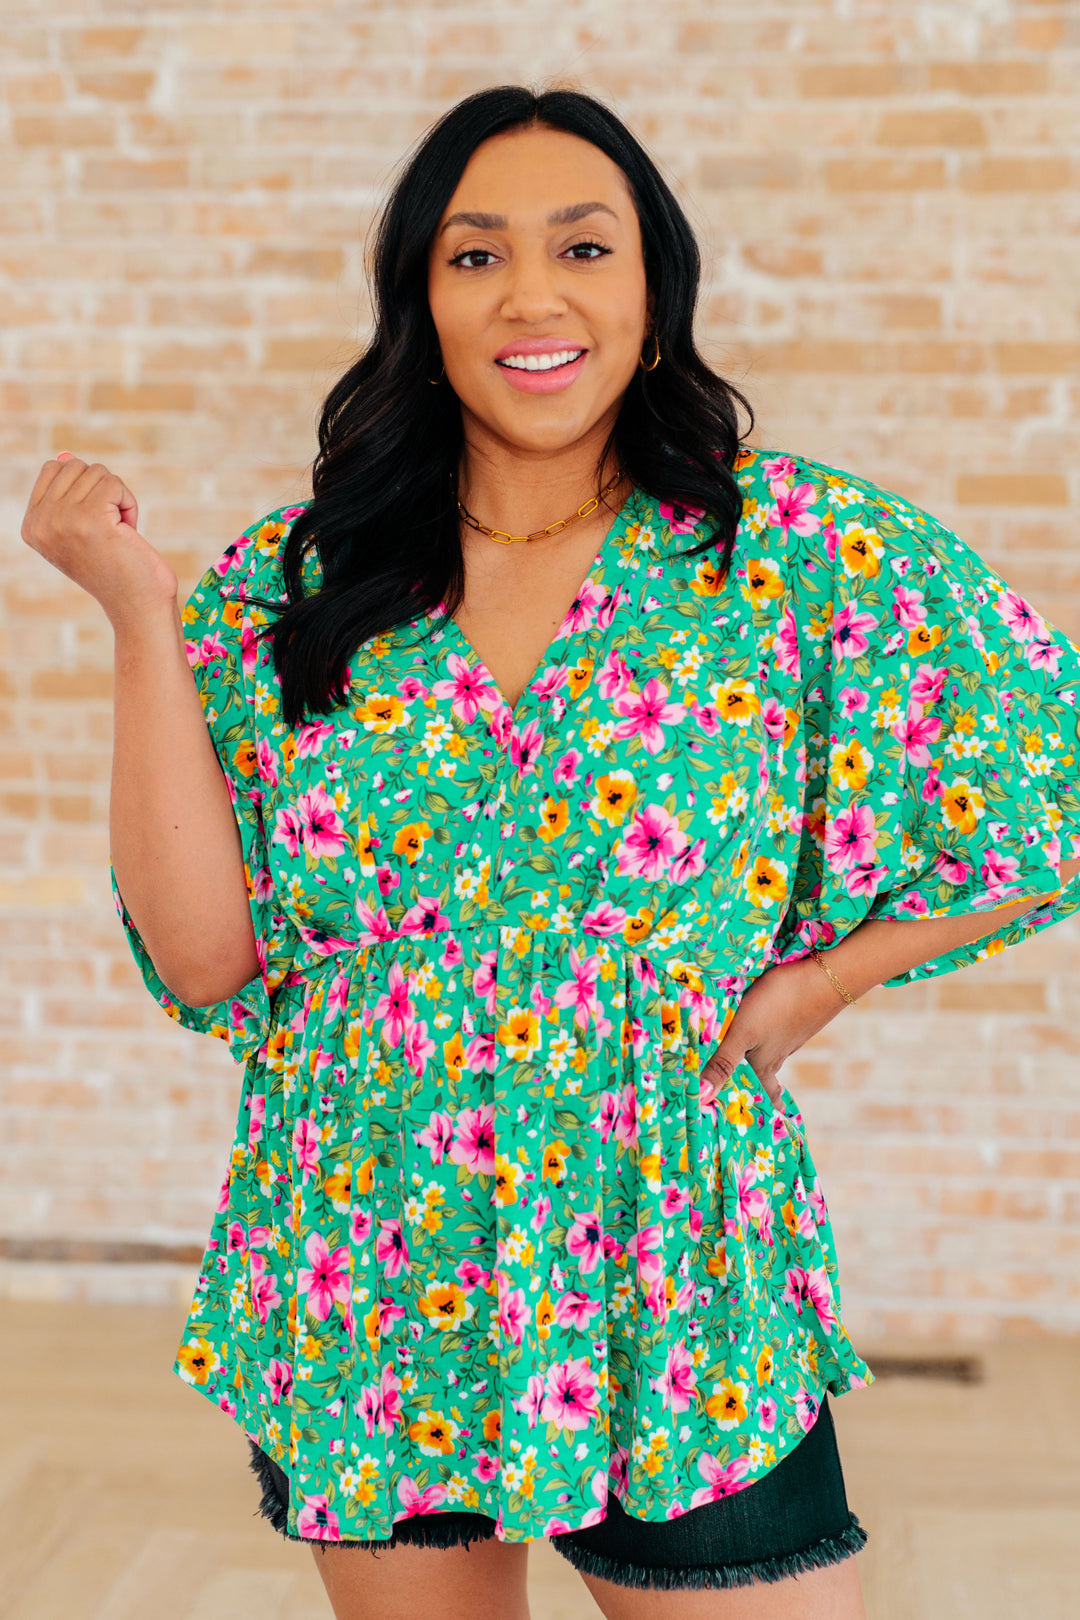 Dreamer Peplum Top in Emerald and Pink Floral